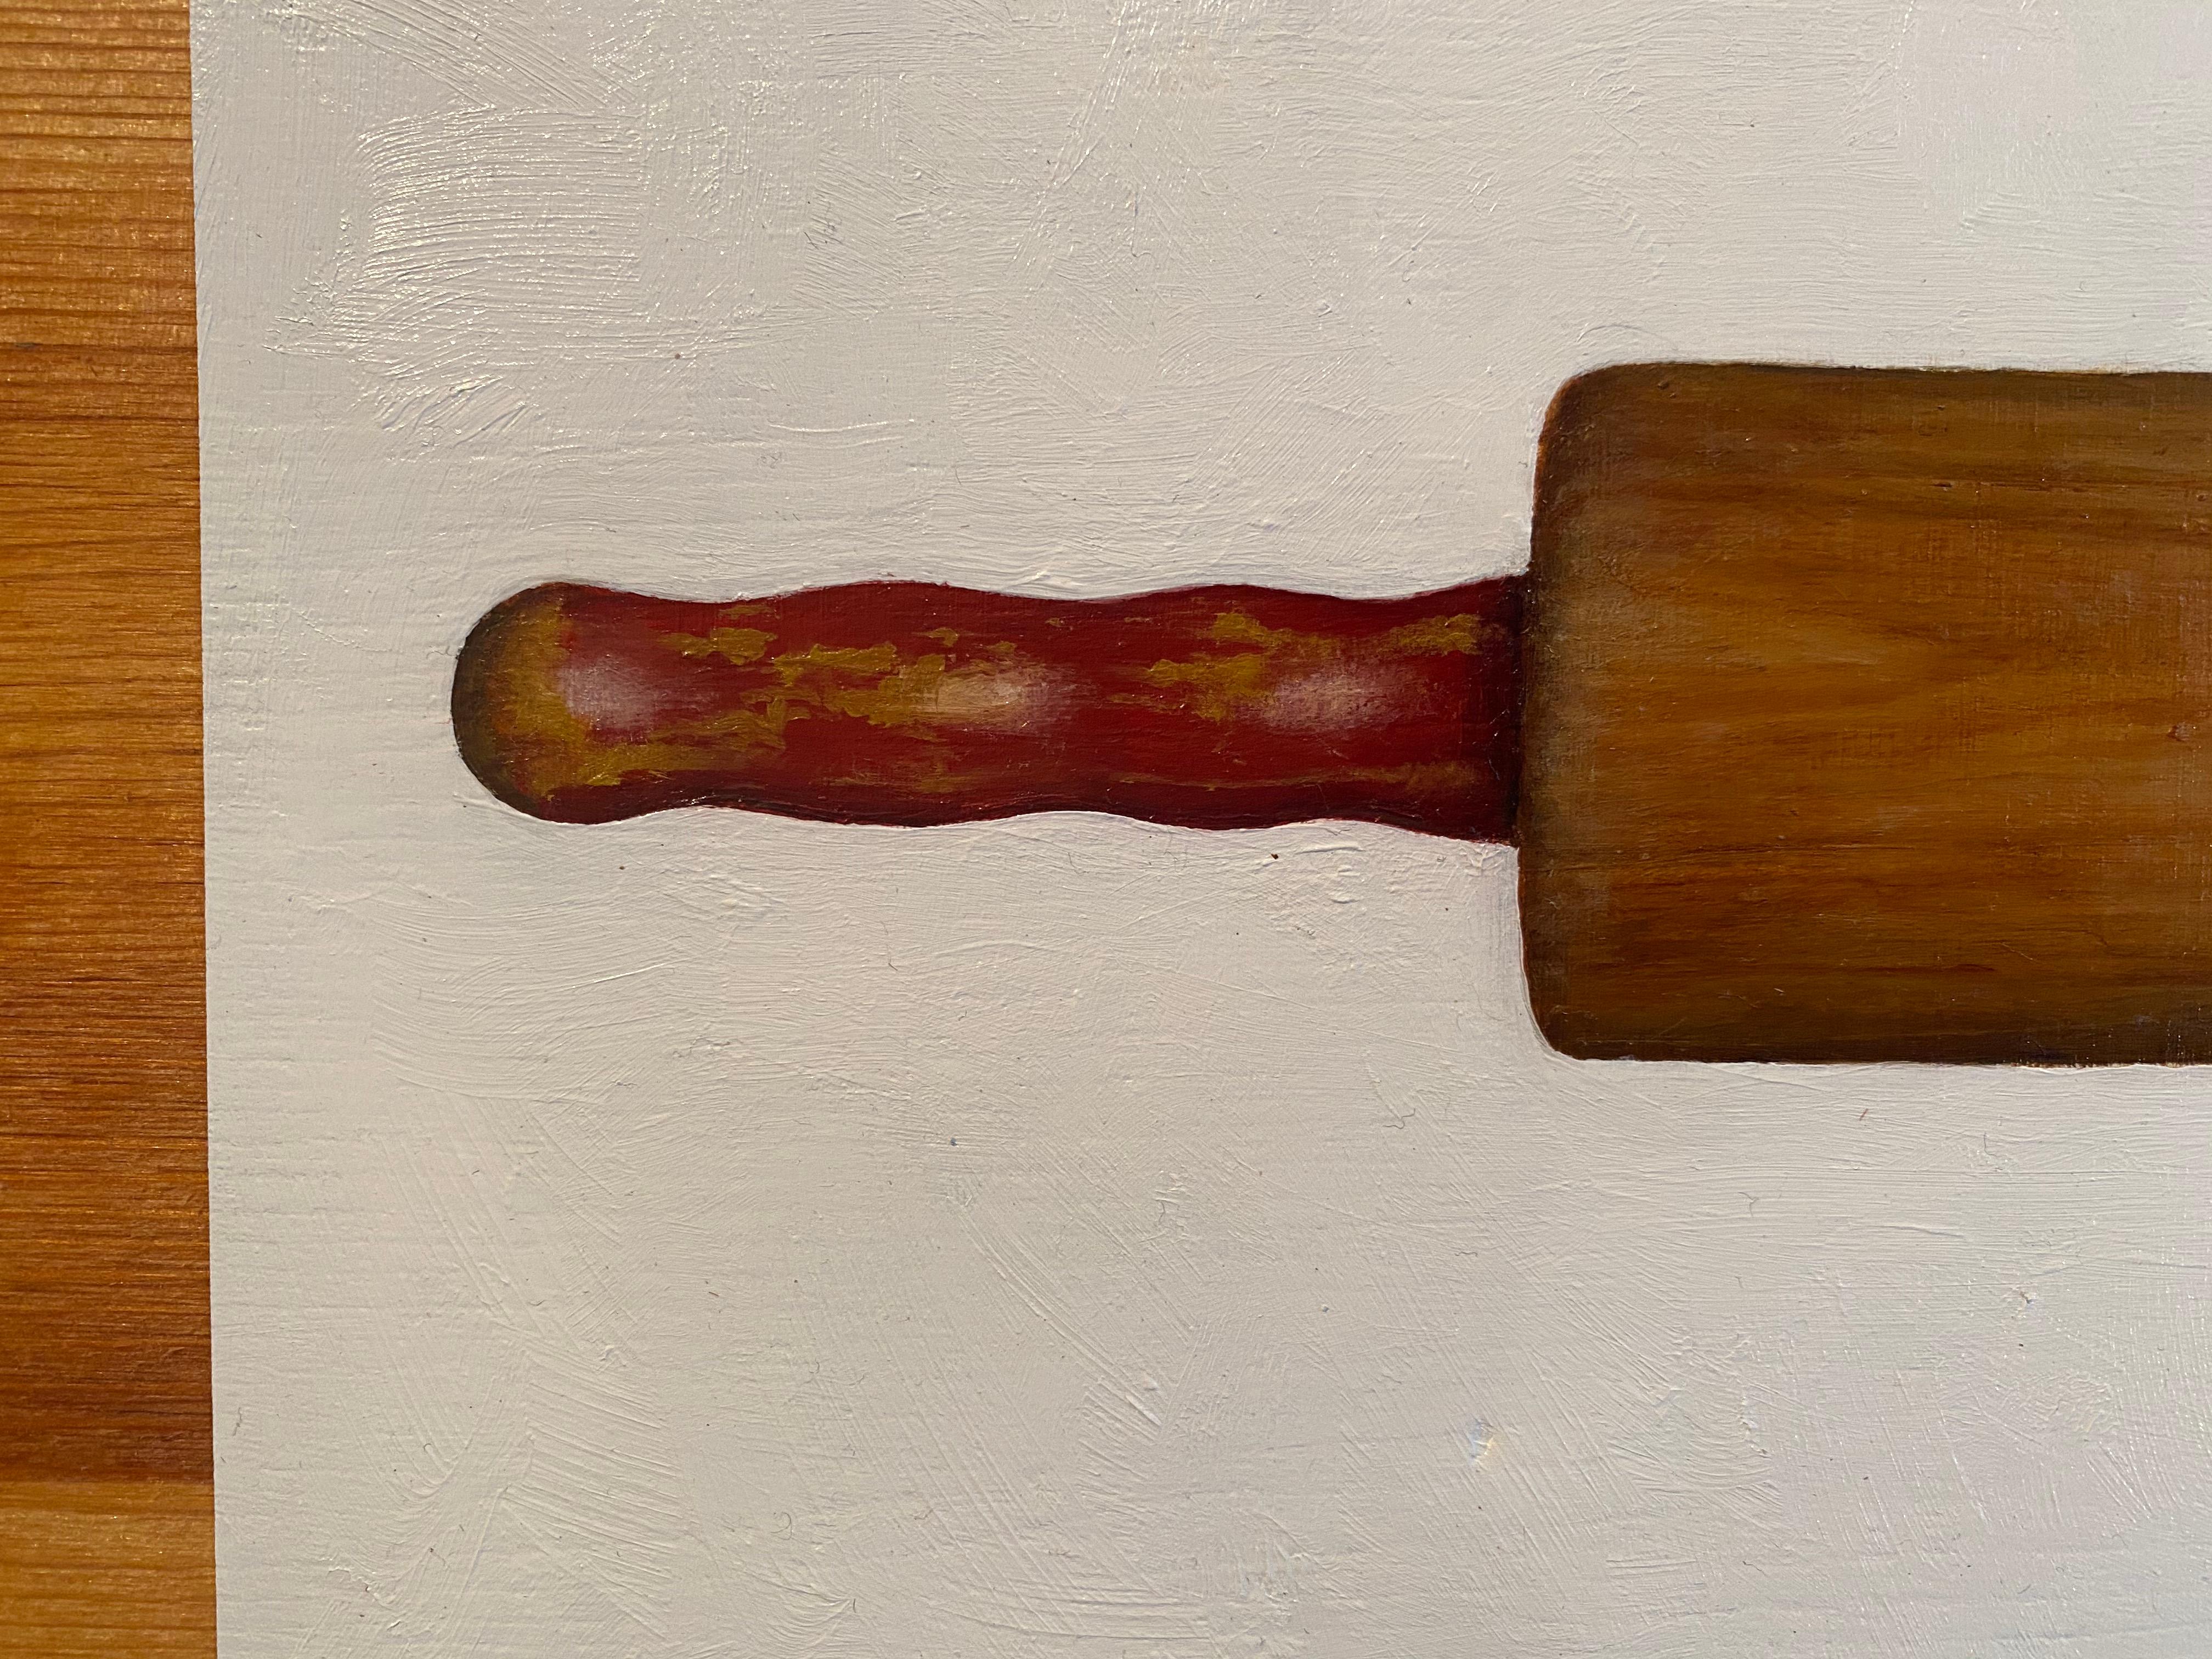 Oil painting of a wooden rolling pin on a wooden board. The wood plank on which 